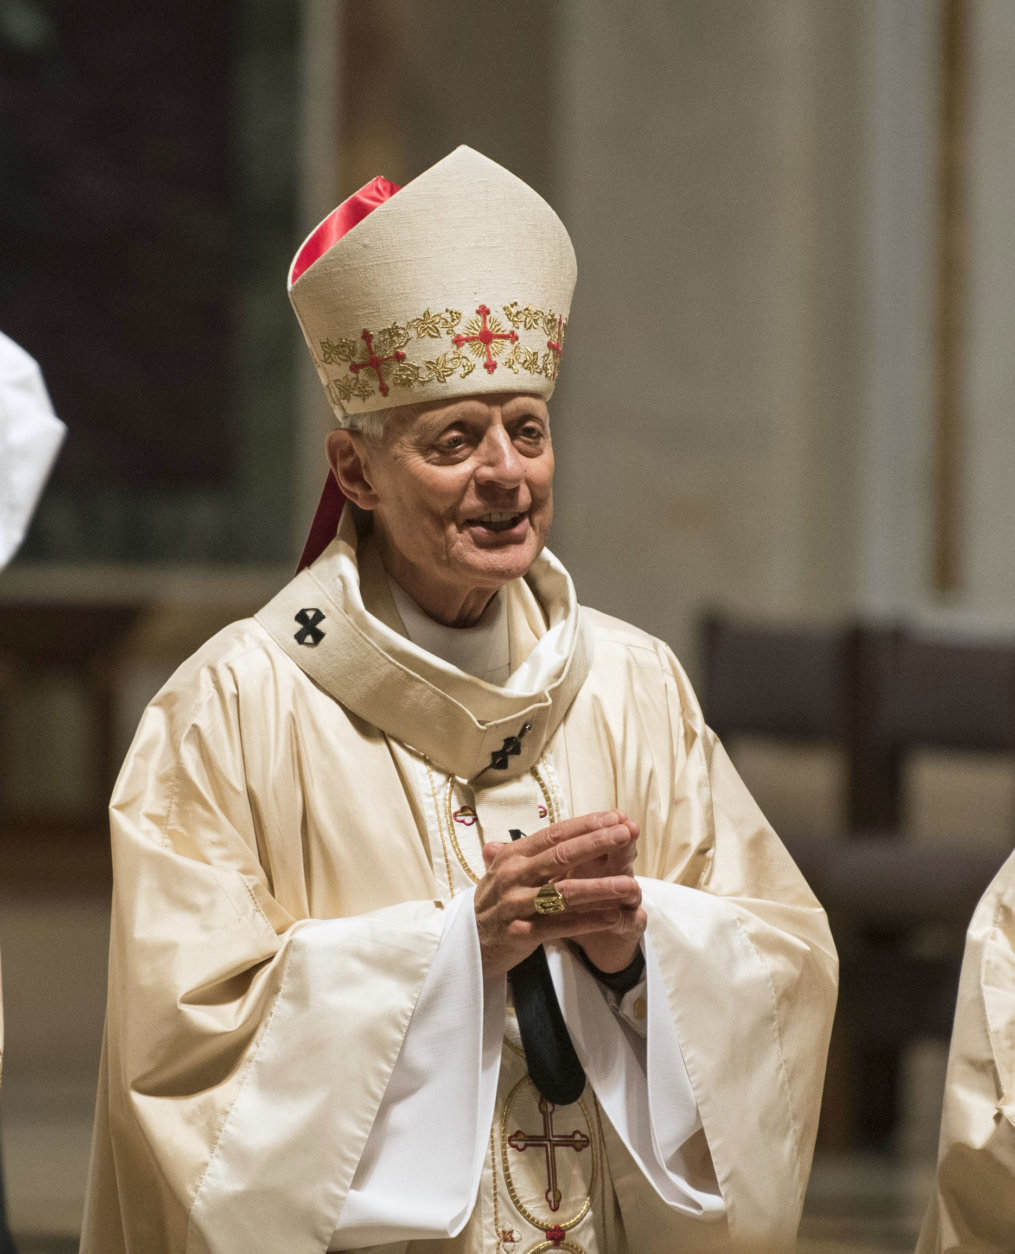 Cardinal Donald Wuerl, Archbishop of Washington, conducts Mass at St. Mathews Cathedral, Wednesday, August 15, 2018 in Washington. (AP Photo/Kevin Wolf)